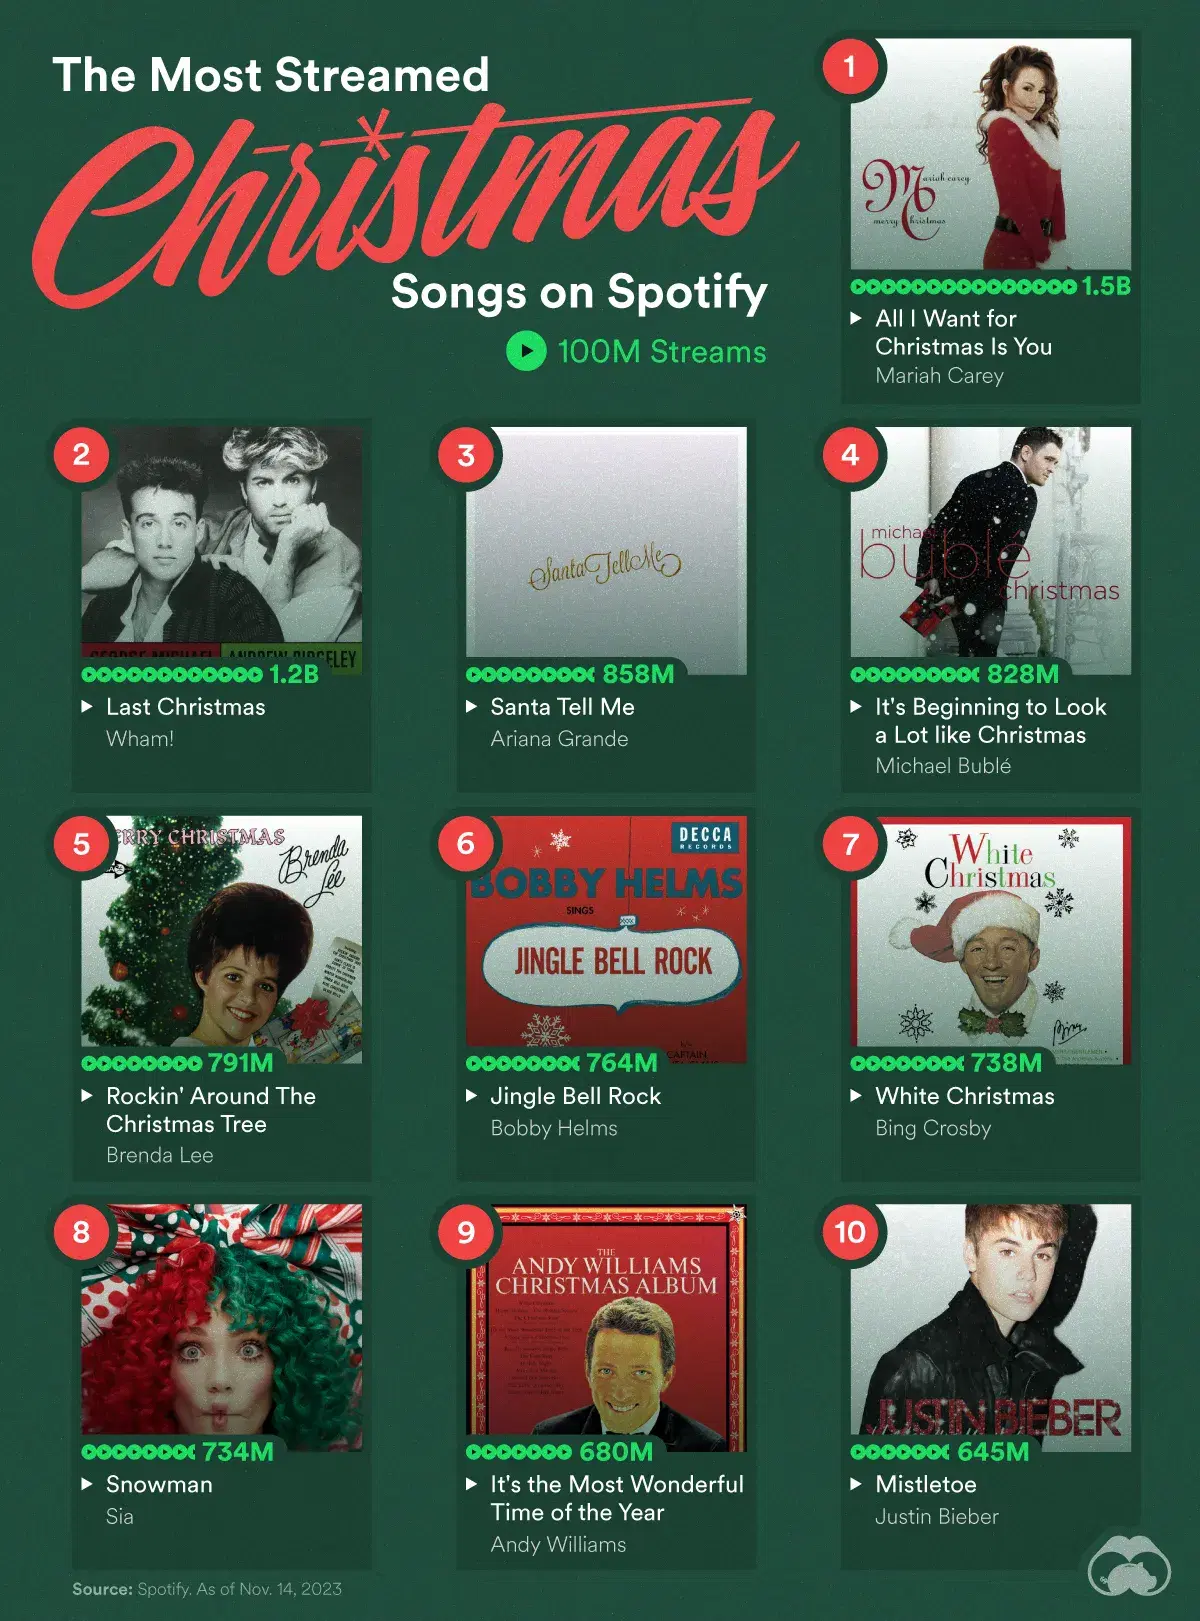 10 Christmas Songs That Will Drive You Crazy This Year